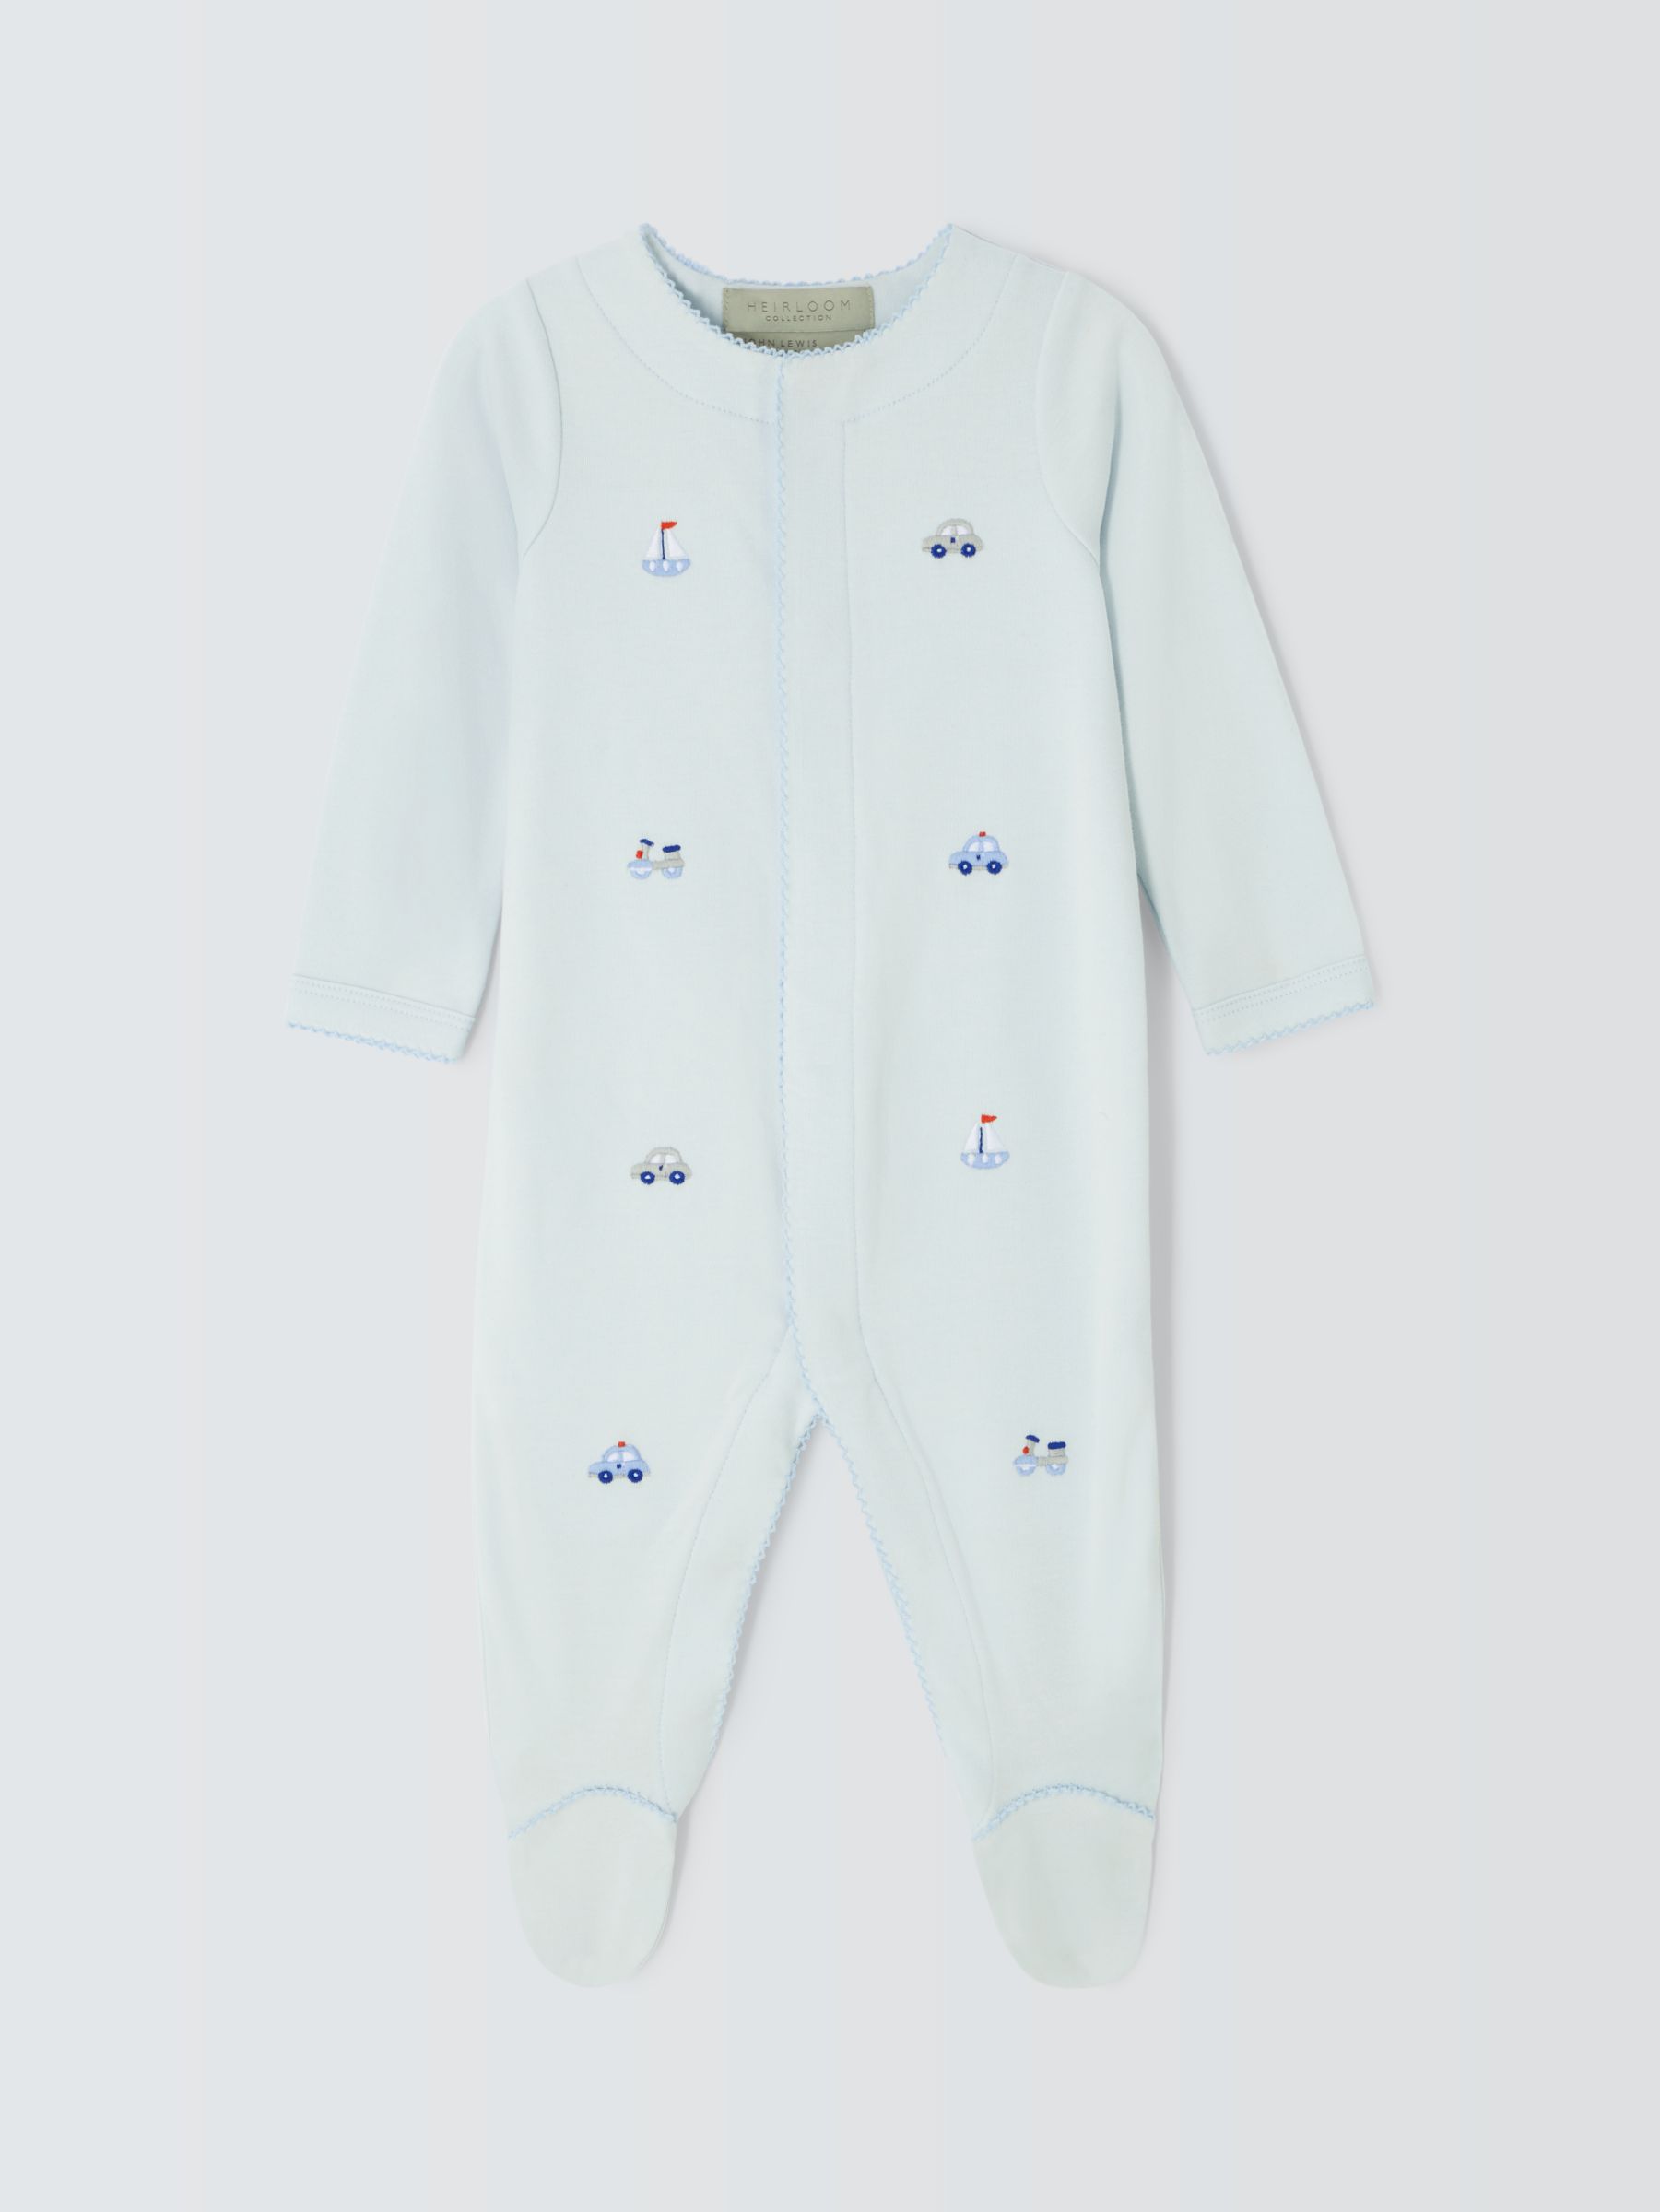 John Lewis Heirloom Collection Baby Transport Toys Embroidered Pima Cotton Sleepsuit, Blue, 3-6 months